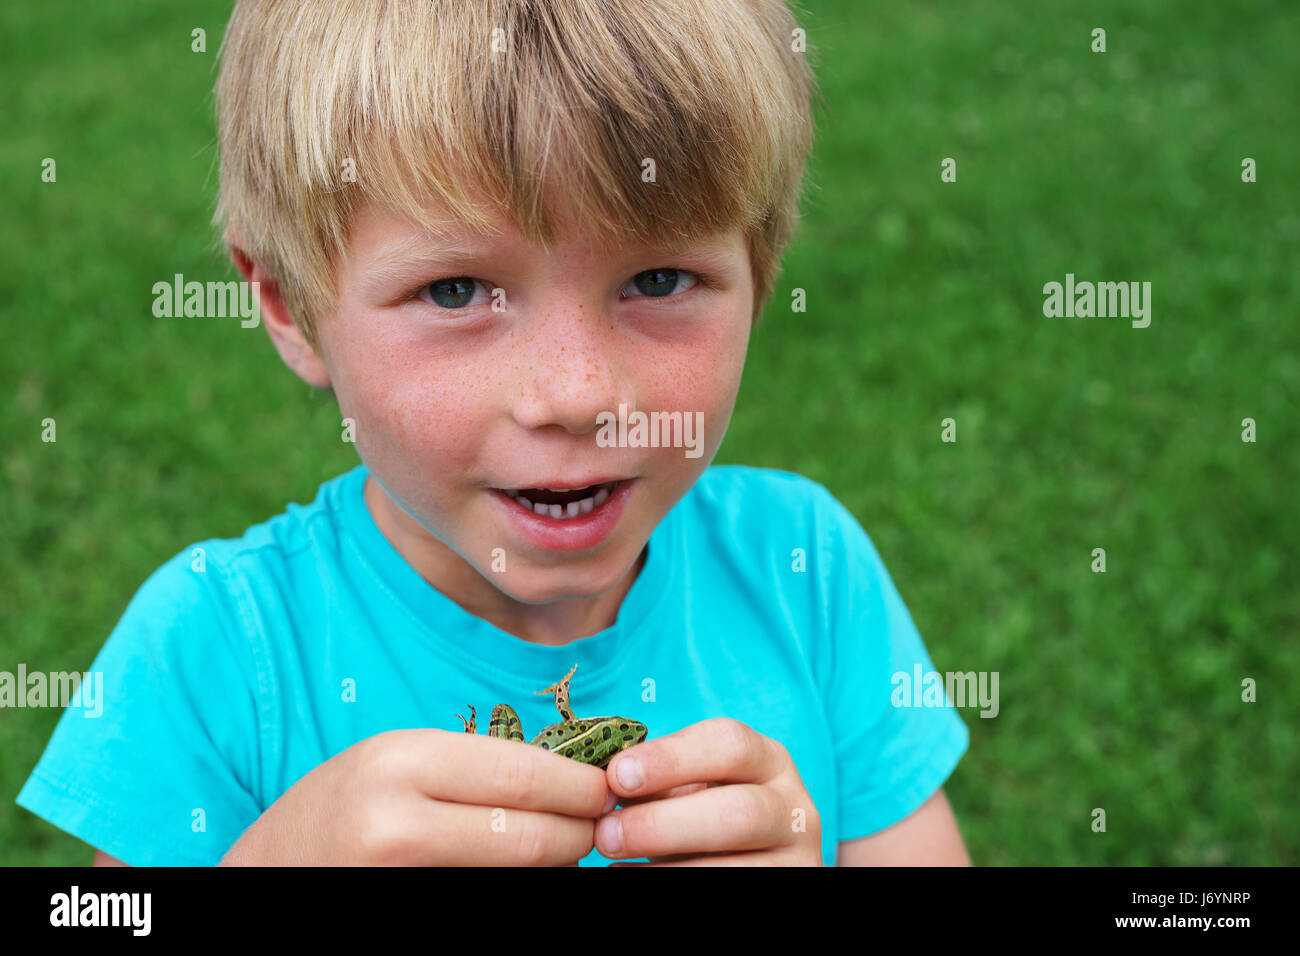 Portrait of a boy holding a frog Stock Photo